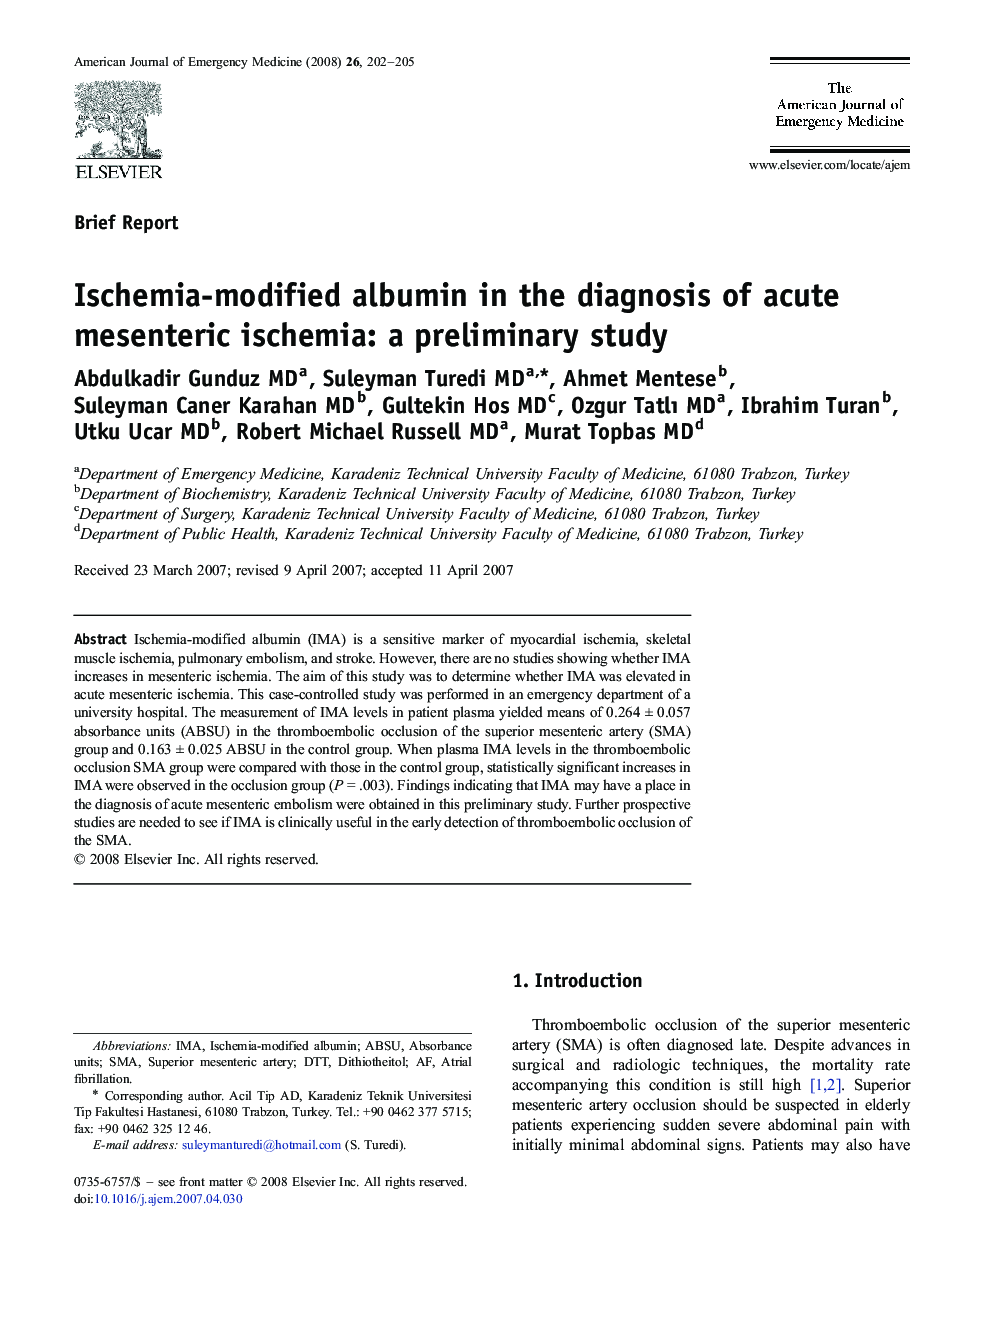 Ischemia-modified albumin in the diagnosis of acute mesenteric ischemia: a preliminary study